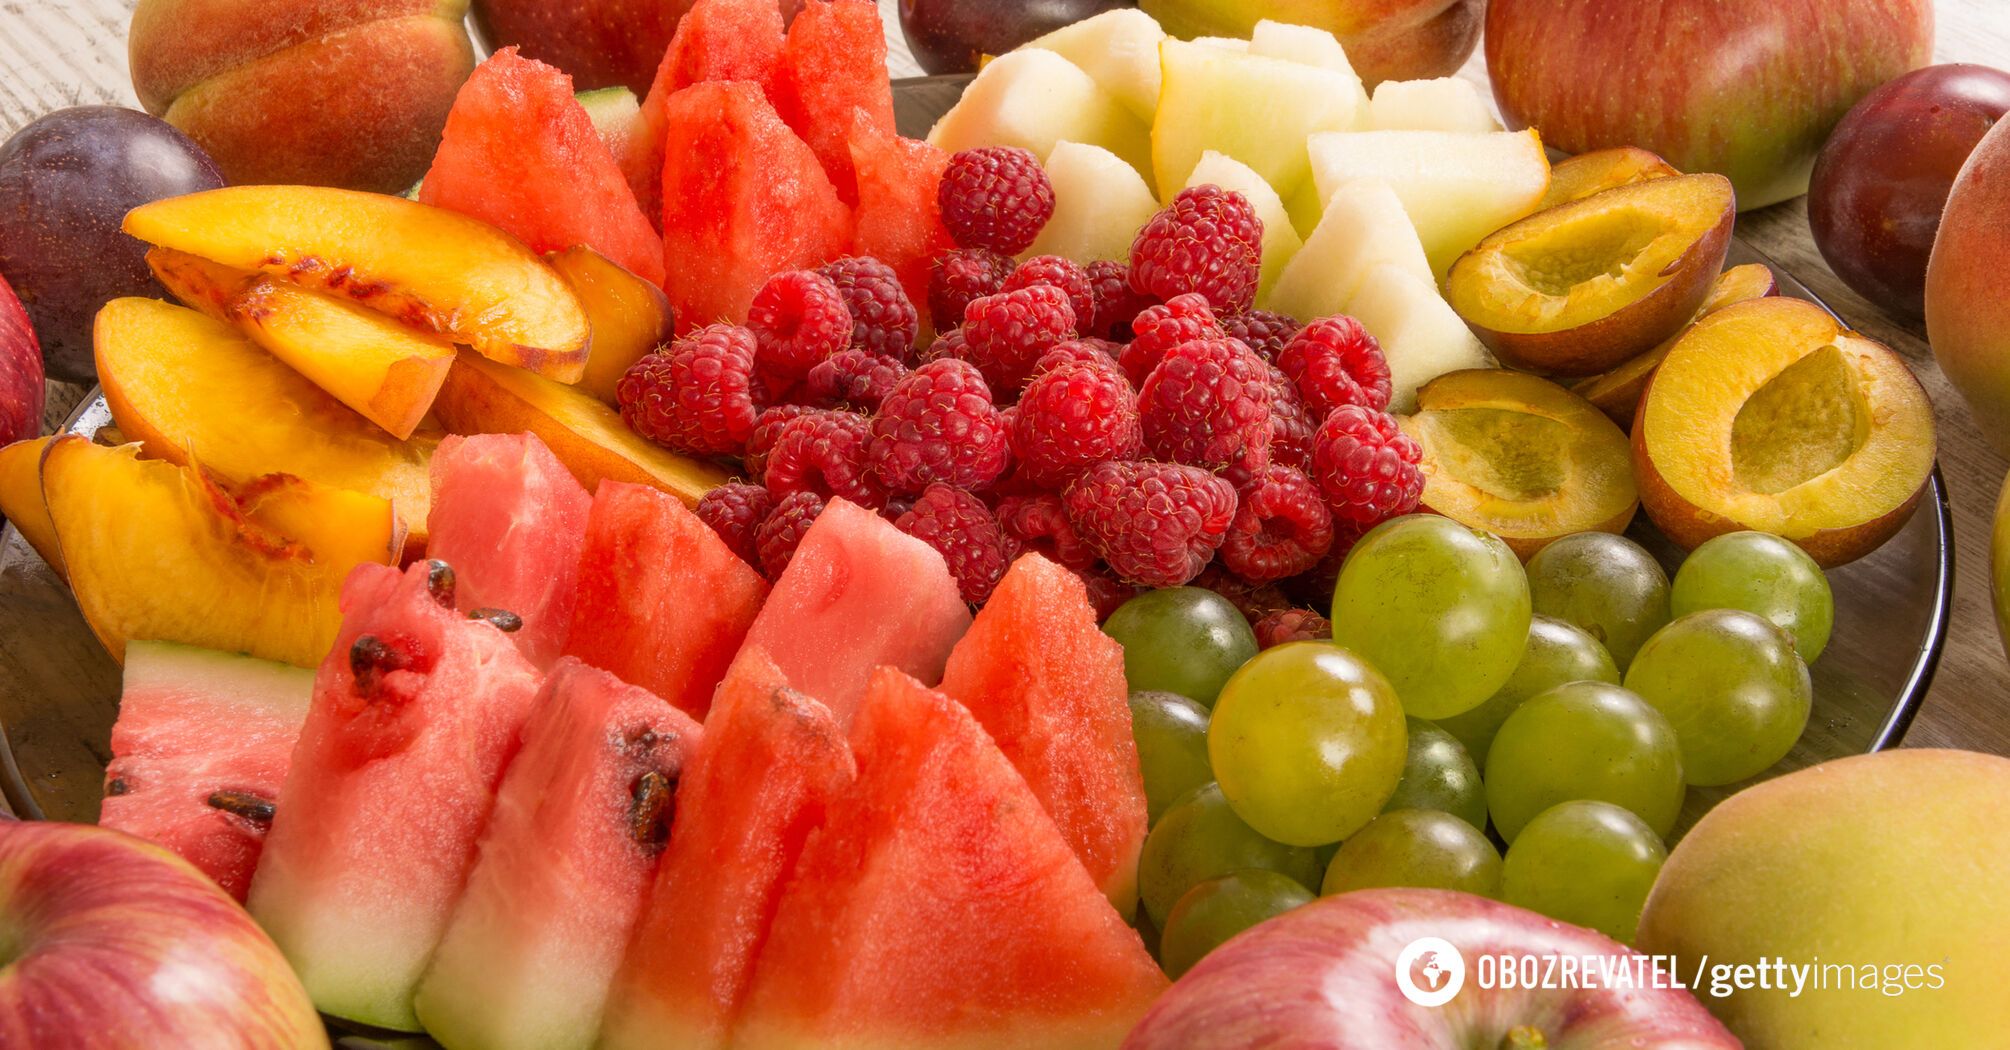 Eat at least 3 servings of fruit per day